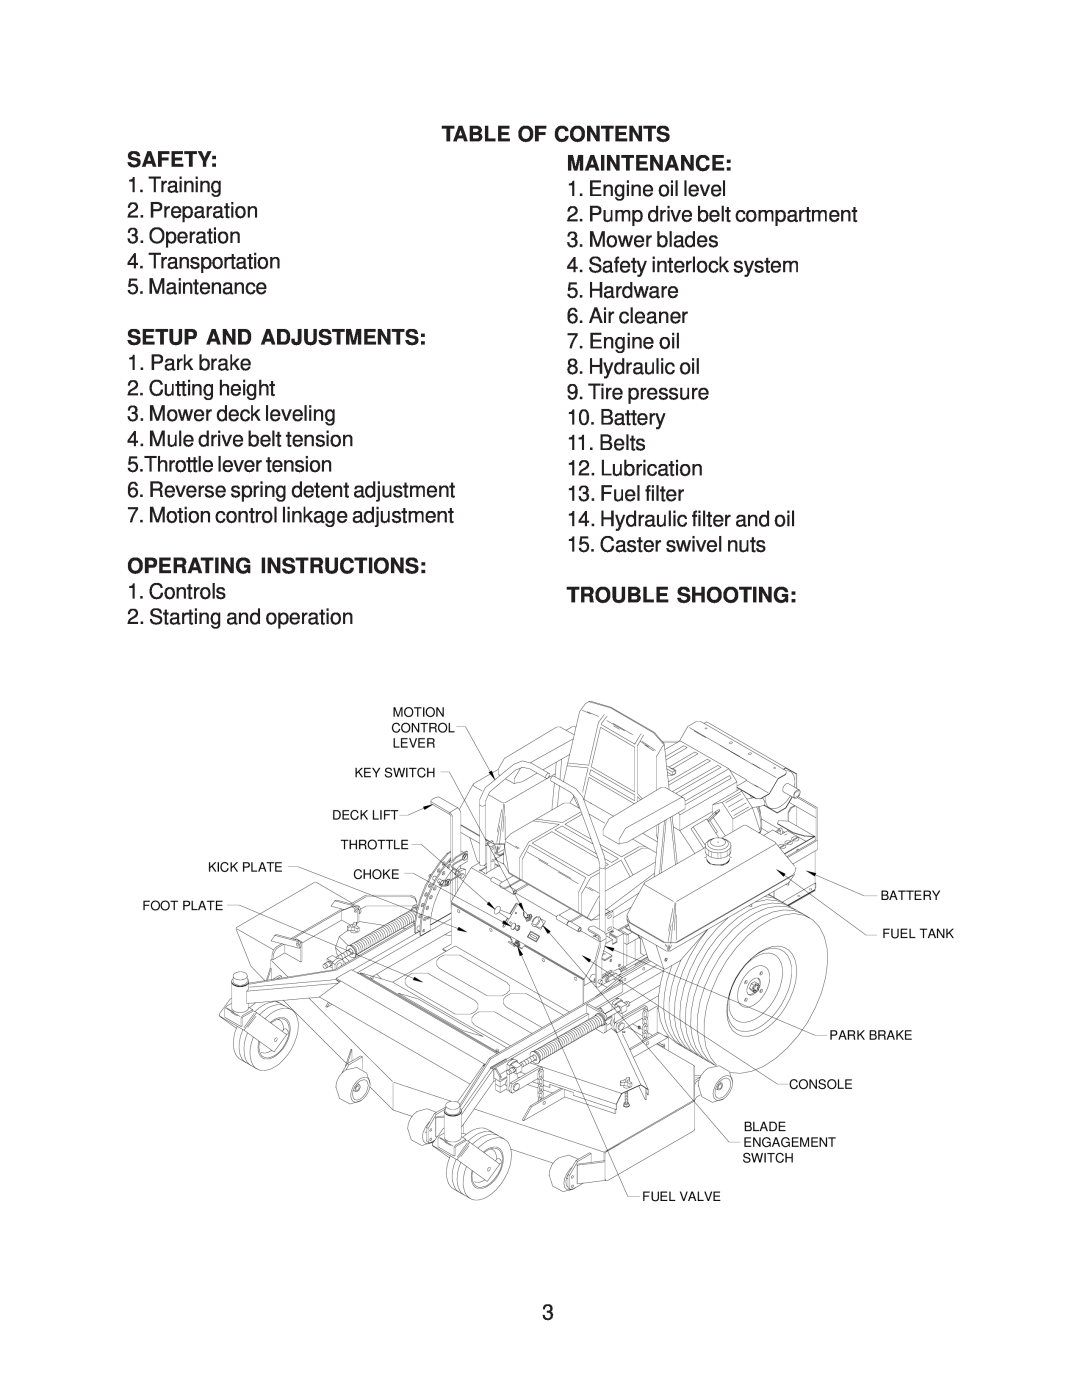 Husqvarna ZTH6125A Table Of Contents, Safety, Maintenance, Setup And Adjustments, Operating Instructions, Trouble Shooting 